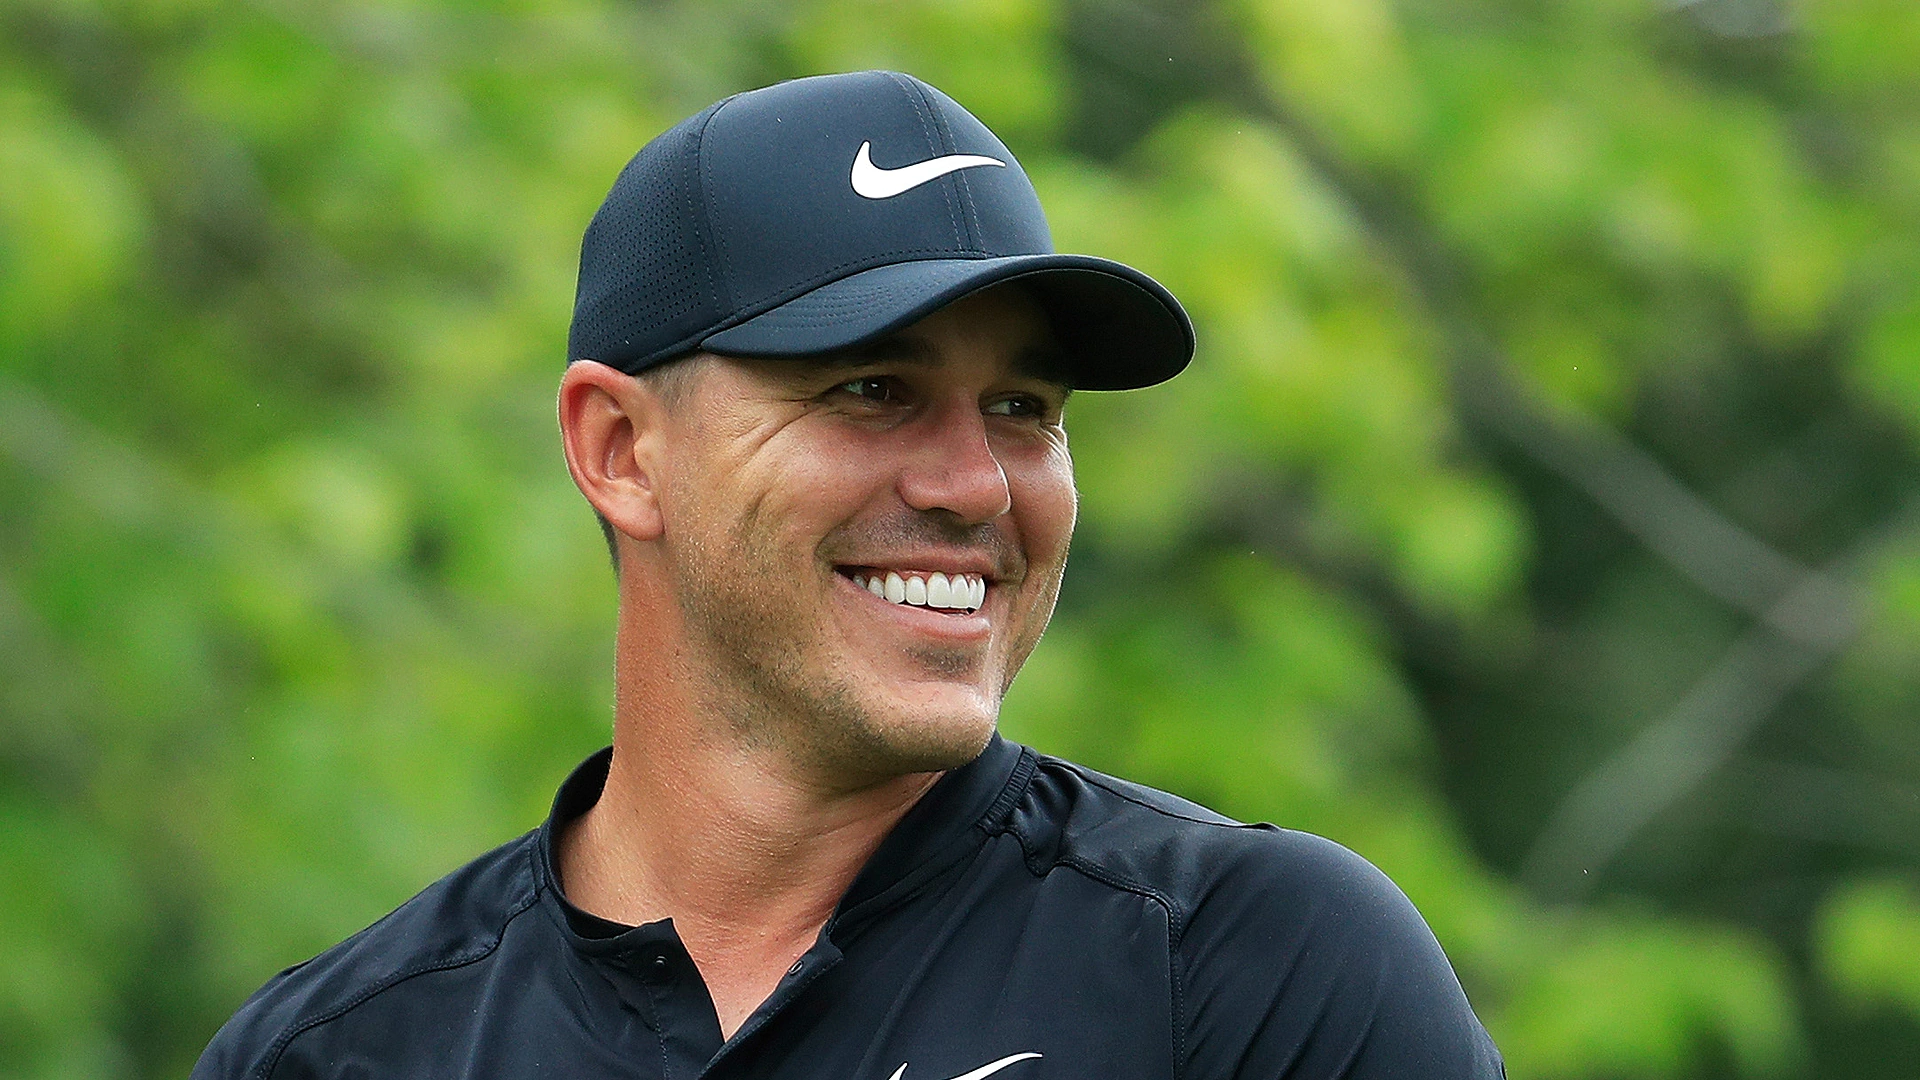 Koepka: Defending a major title is hard but exciting